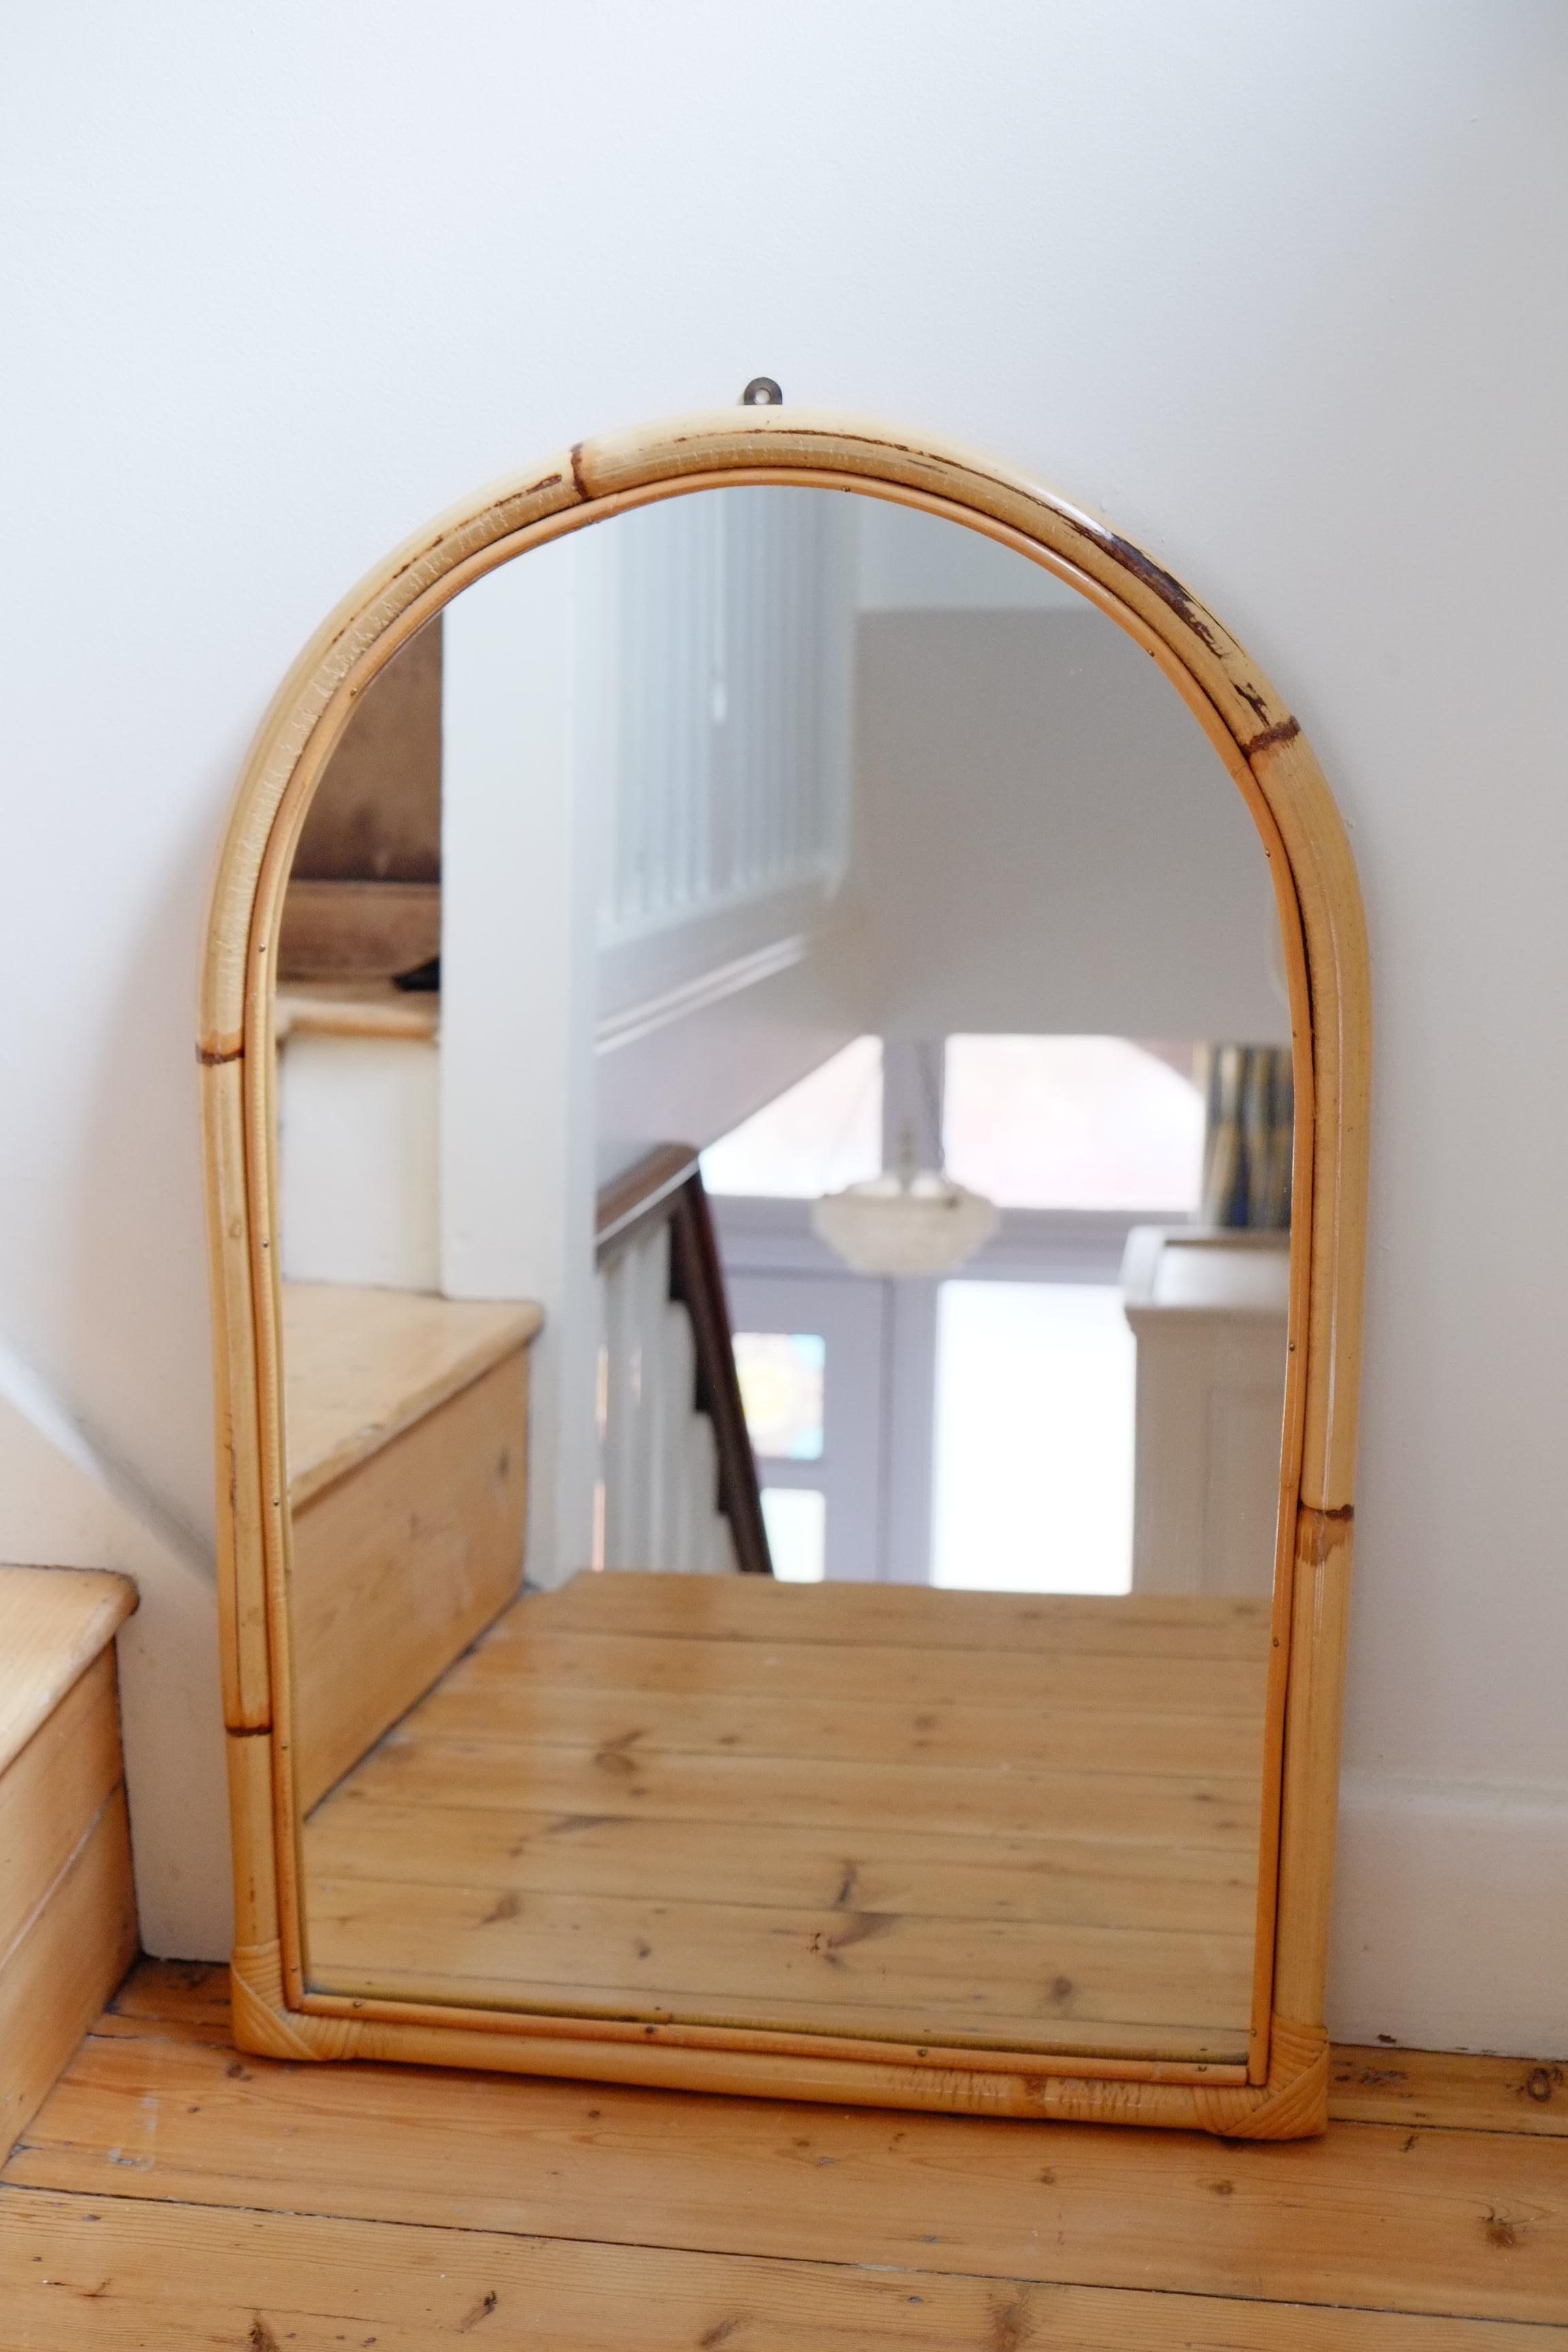 A beautiful large midcentury mirror with a bohemian bamboo frame. The frame has an arched top and a double bamboo frame with tiny brass pins holding the slimmer bamboo in place. This piece would look amazing in a hallway or bathroom. 

Measure: 51